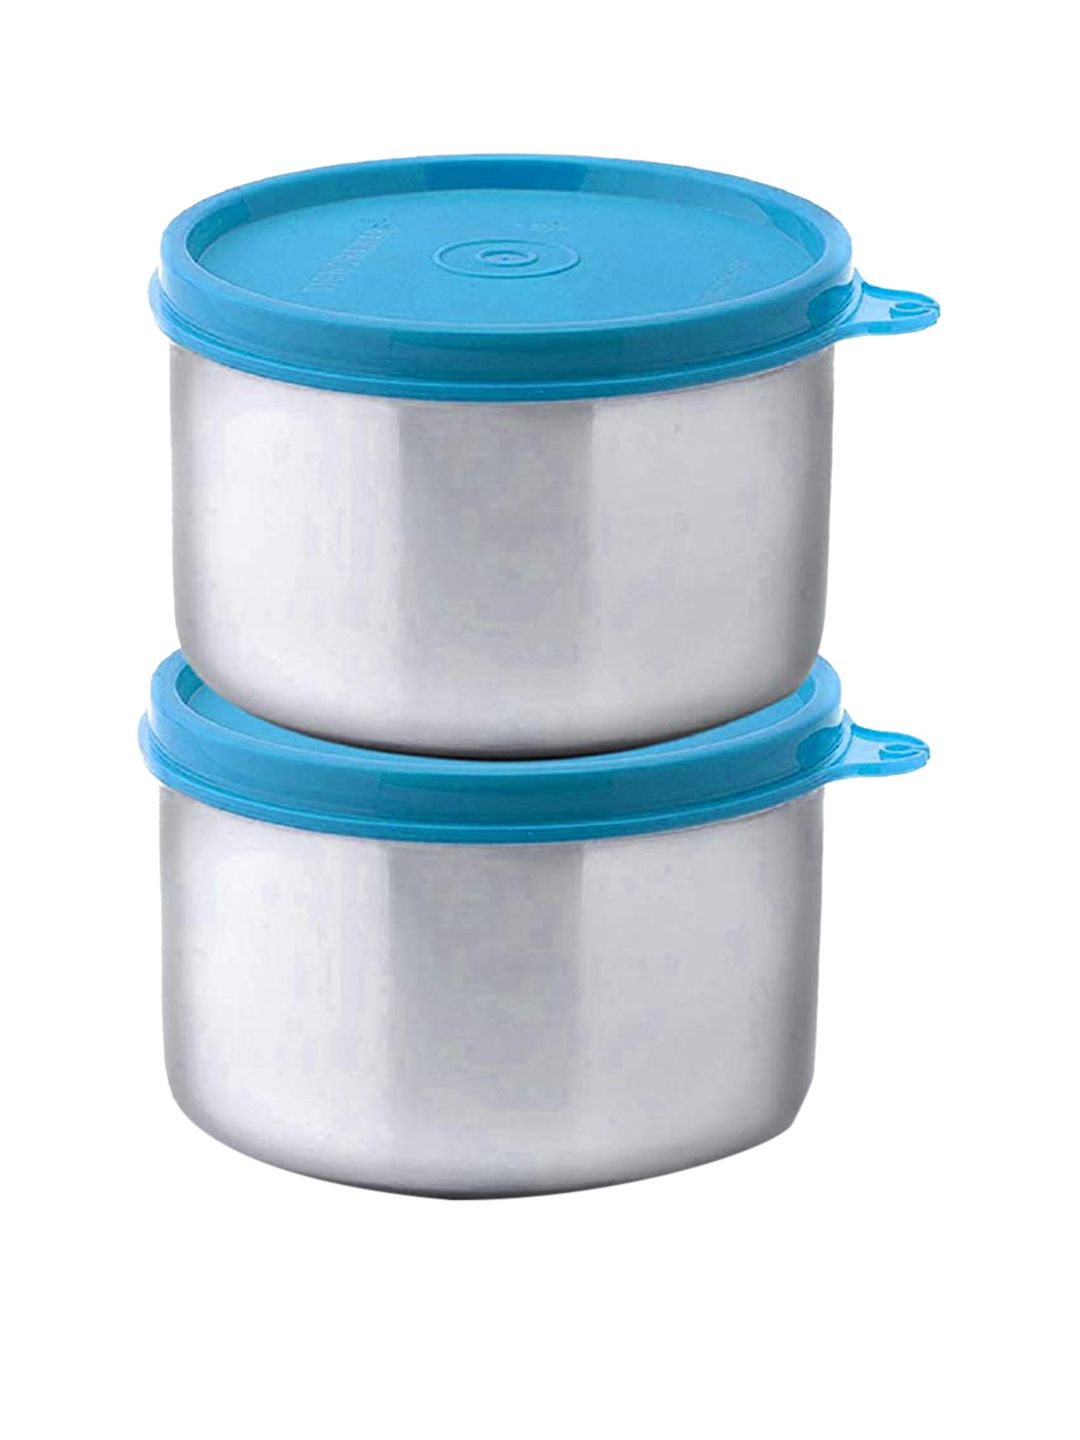 Signoraware Set Of 2 Silver-Toned & Blue Stainless Steel Container 500 ml Price in India